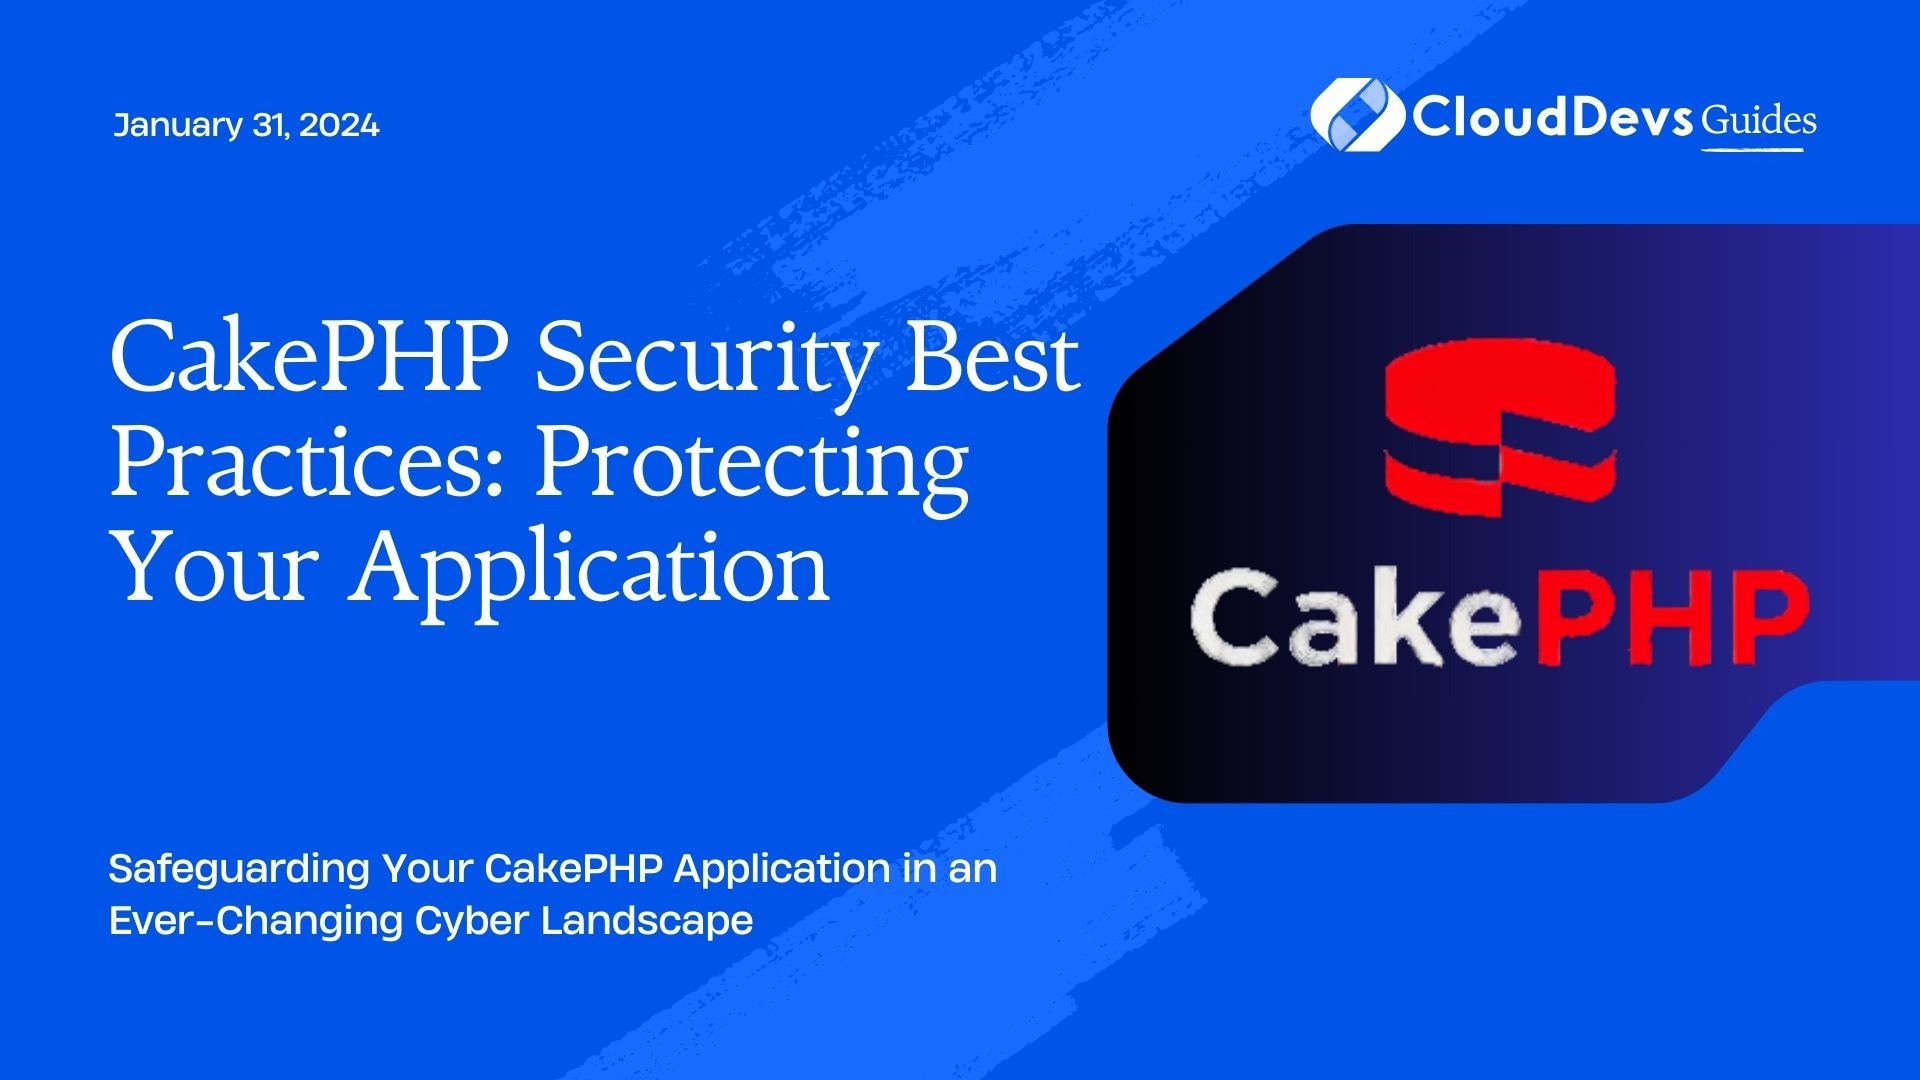 CakePHP Security Best Practices: Protecting Your Application